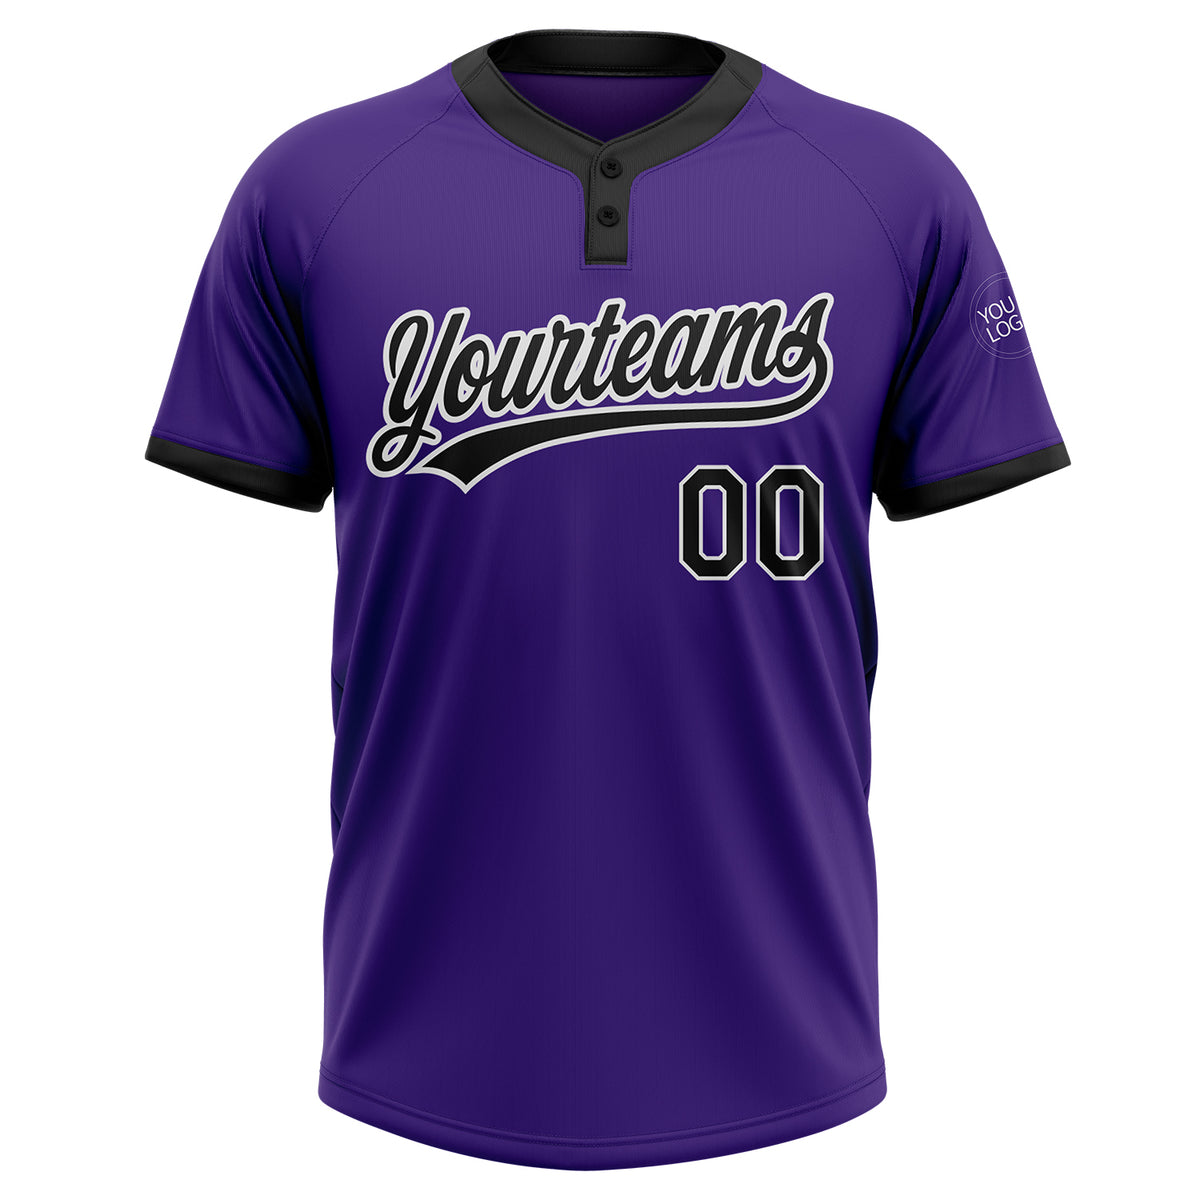 CTX Softball - black uniforms with purple numbers and letters and